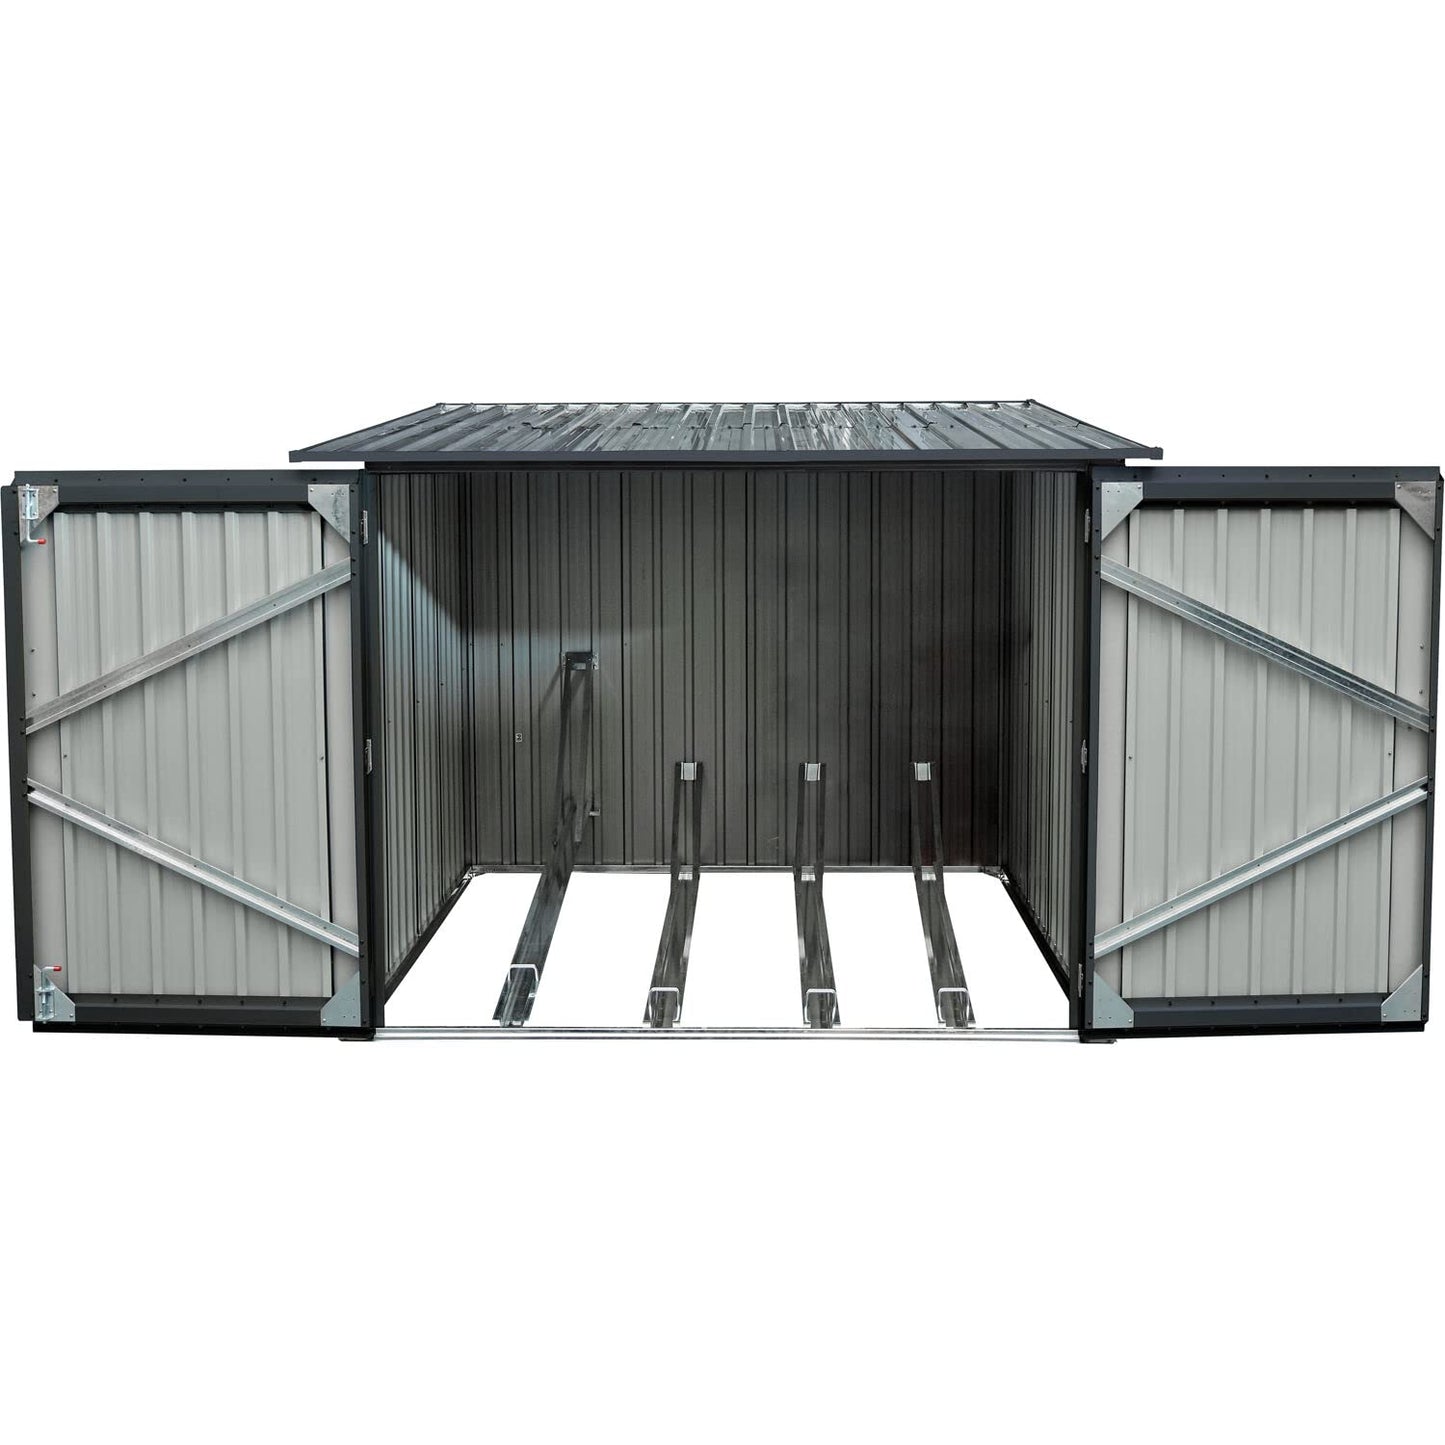 Hanover Galvanized Steel Bicycle Storage Shed with Slope Roof and Twist Lock and Key in Dark Gray, Stores up to 4 Bikes